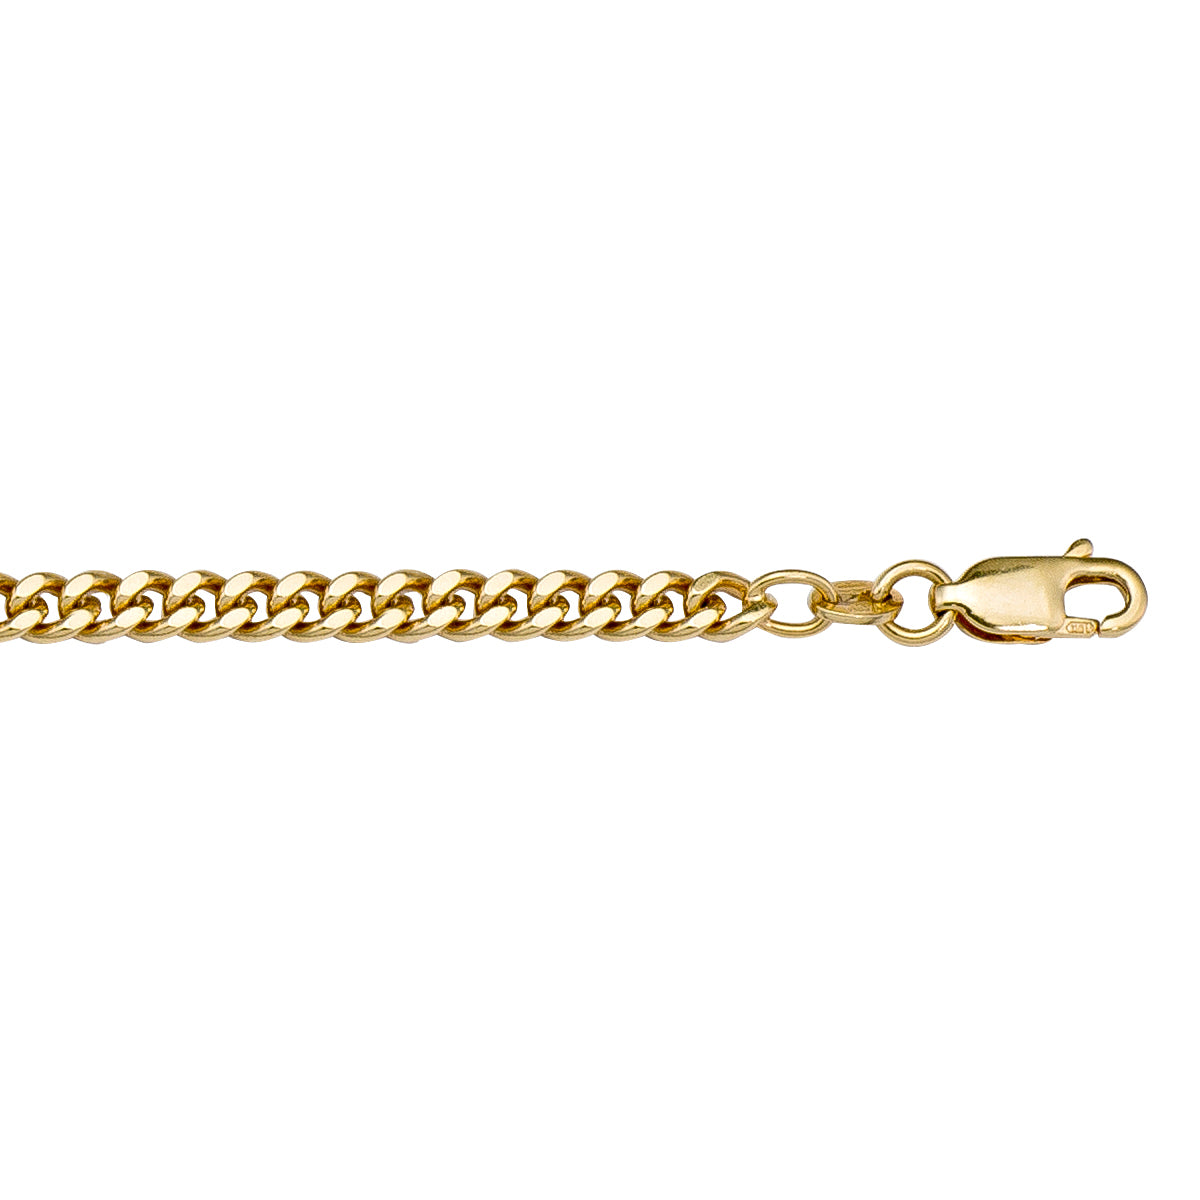 CHAINS YELLOW GOLD SOLID CURB LINK 